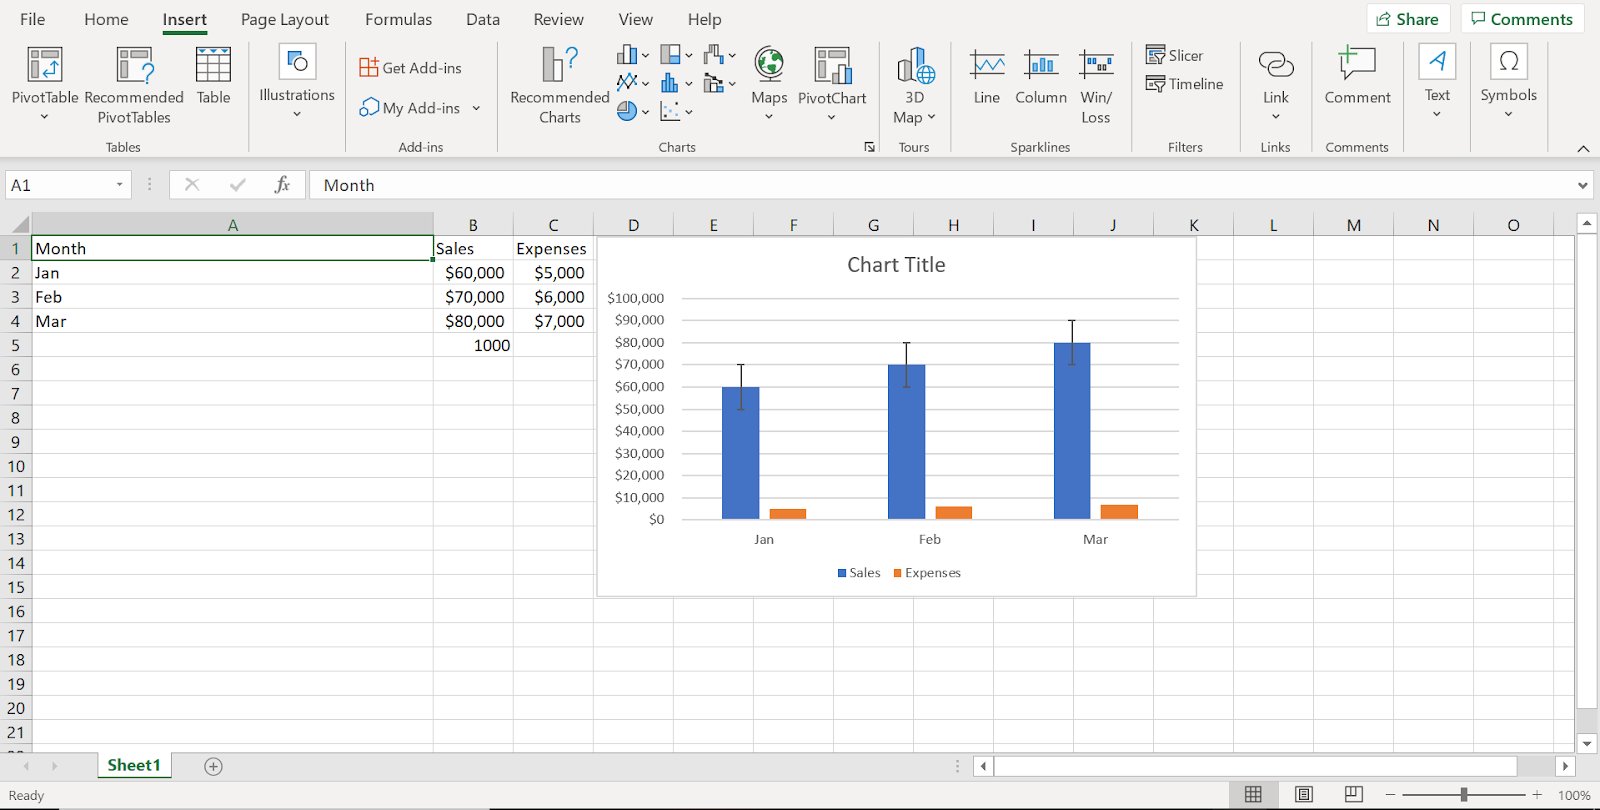 How to Add Error Bars in Excel & Google Sheets